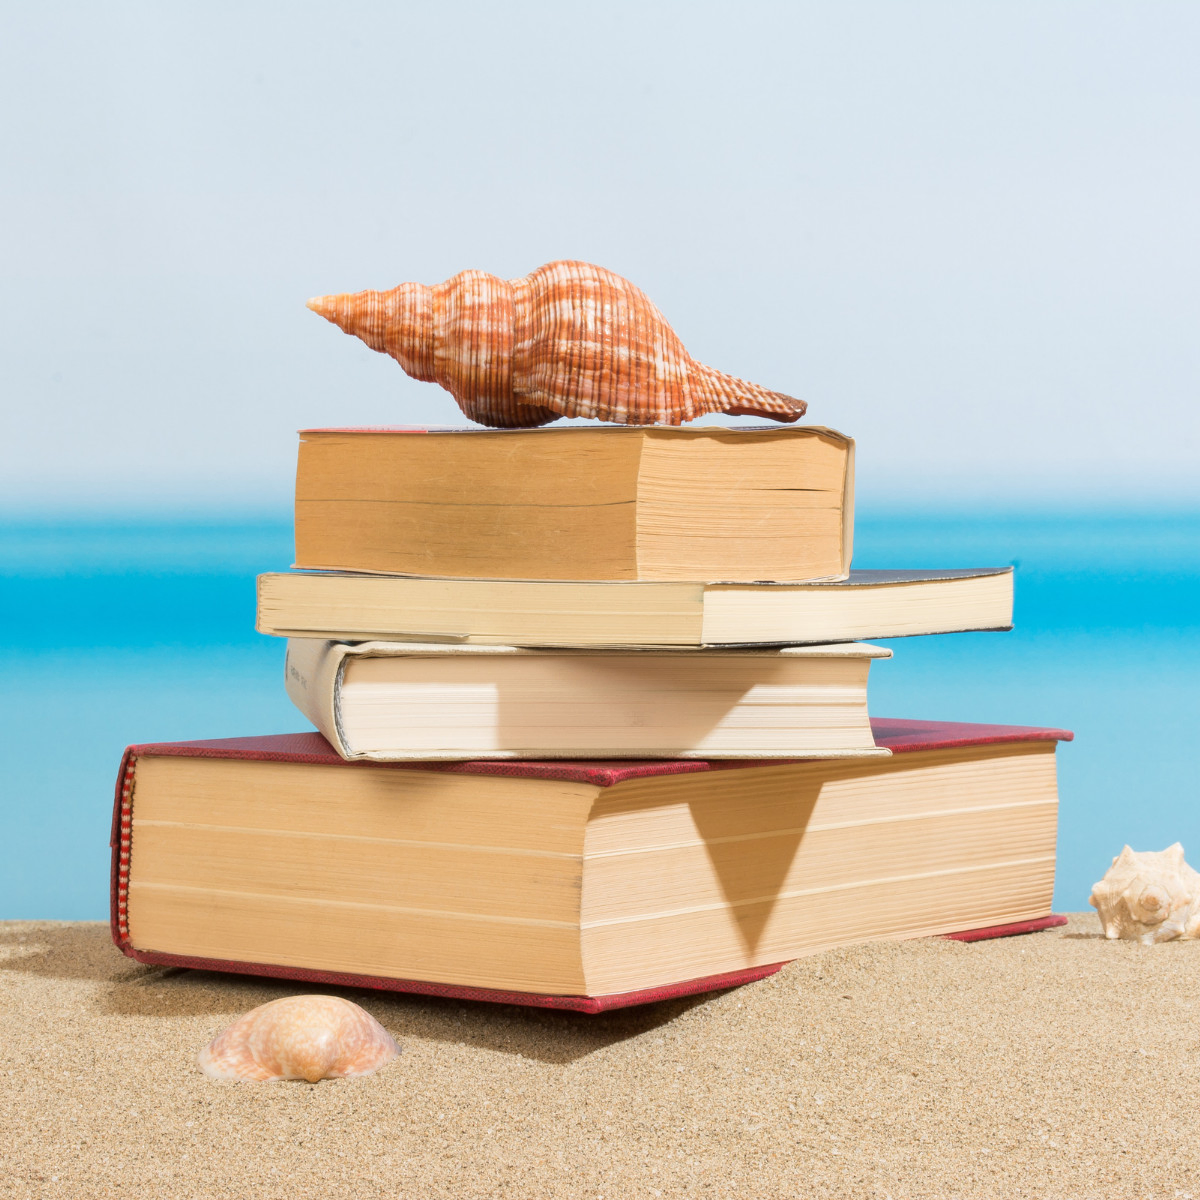 What Are The Benefits Of Summer Reading?